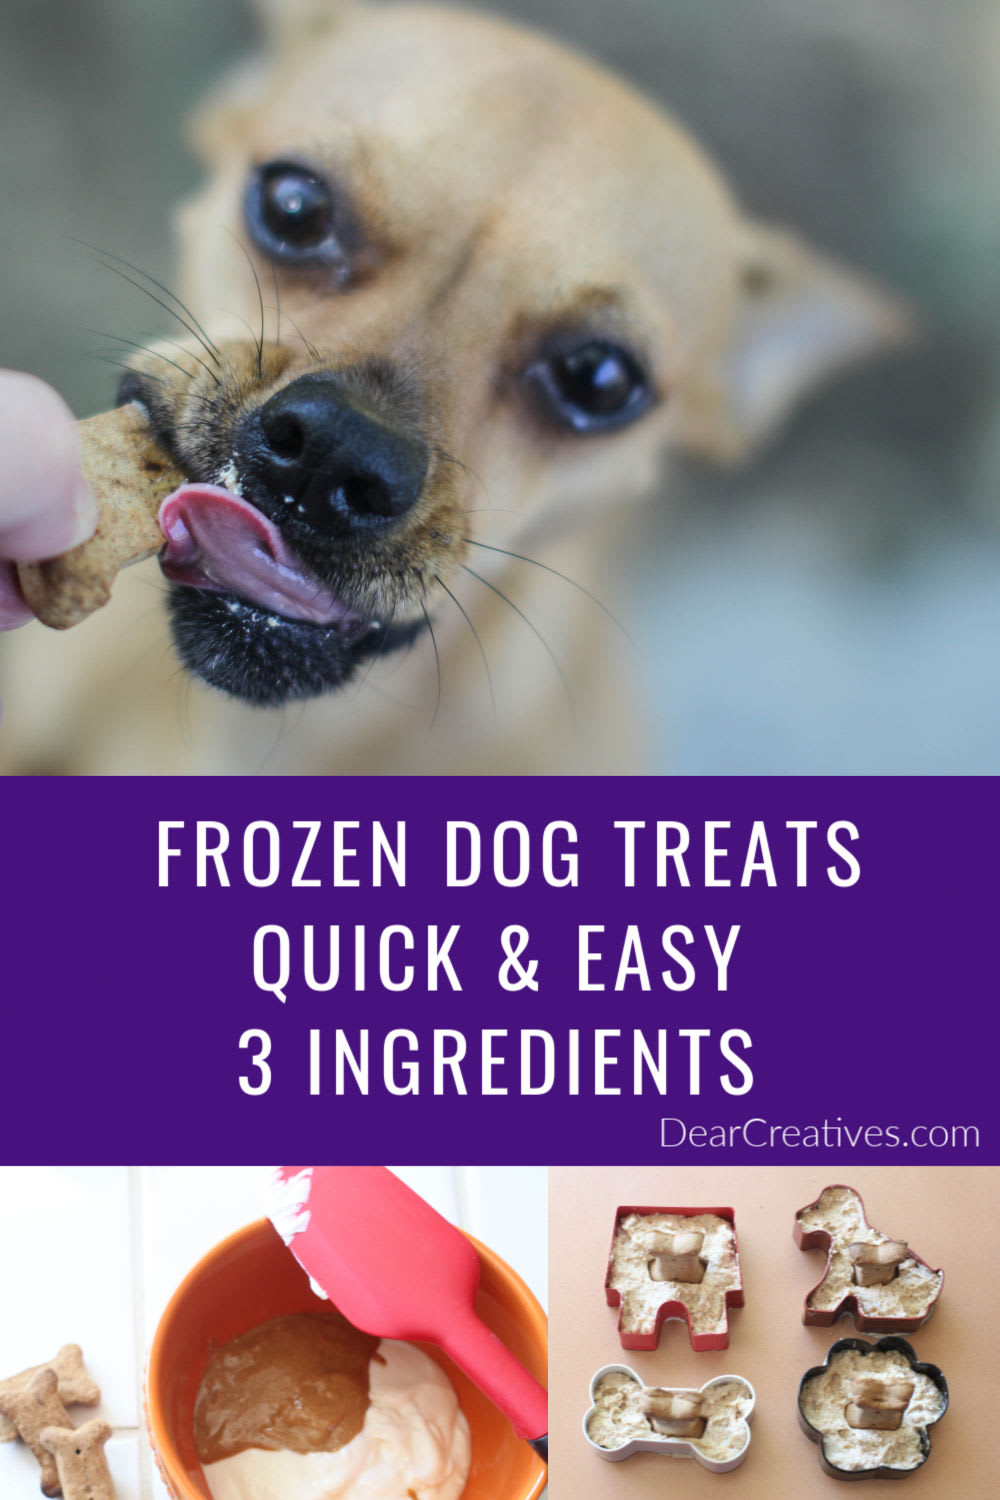 Frozen Dog Treats - Quick And Easy To Make!